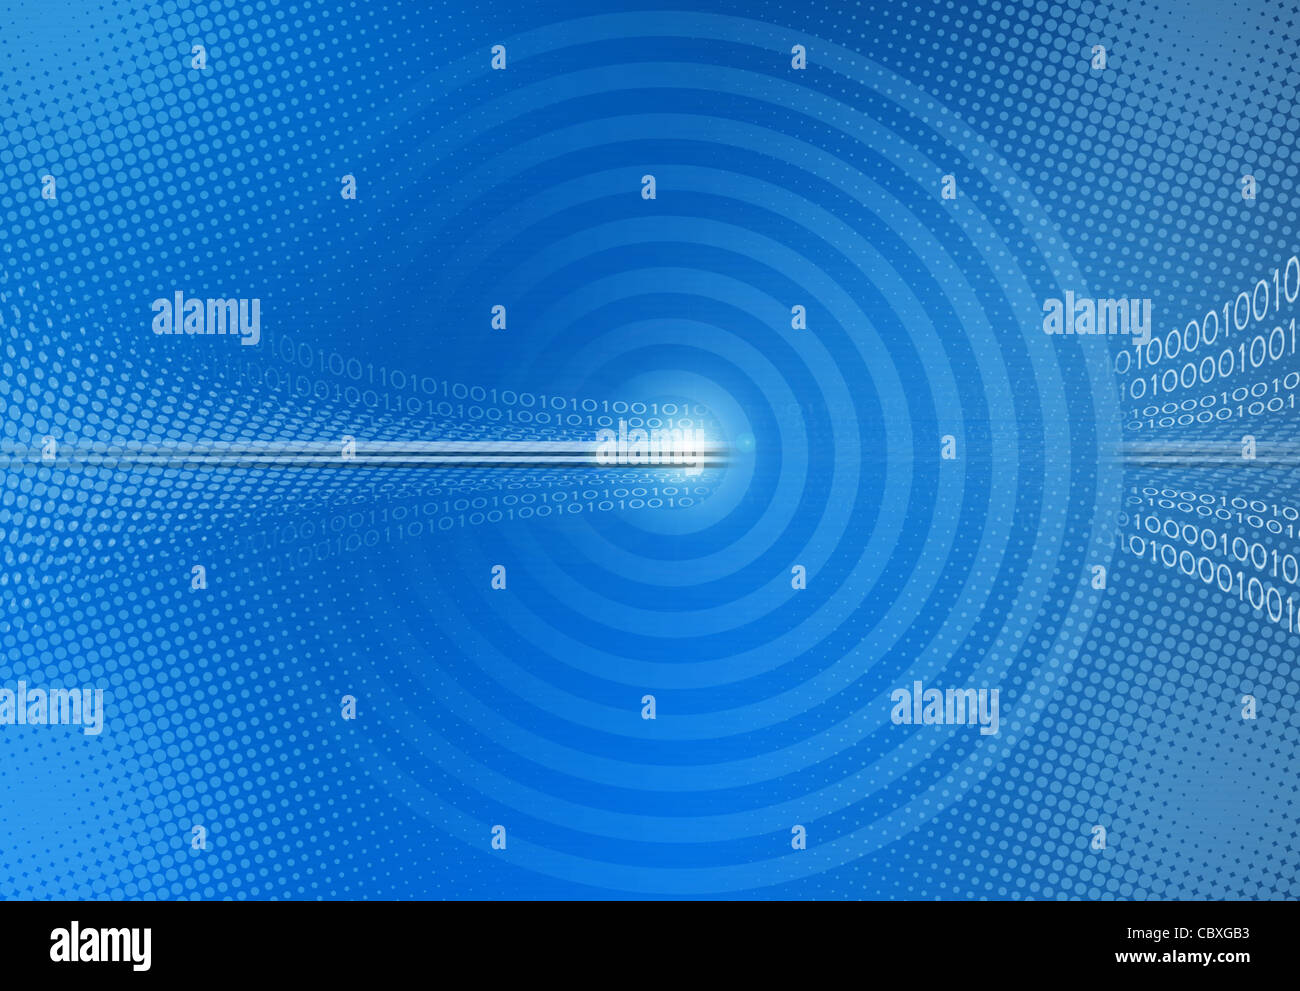 blue abstract background with binary code Stock Photo